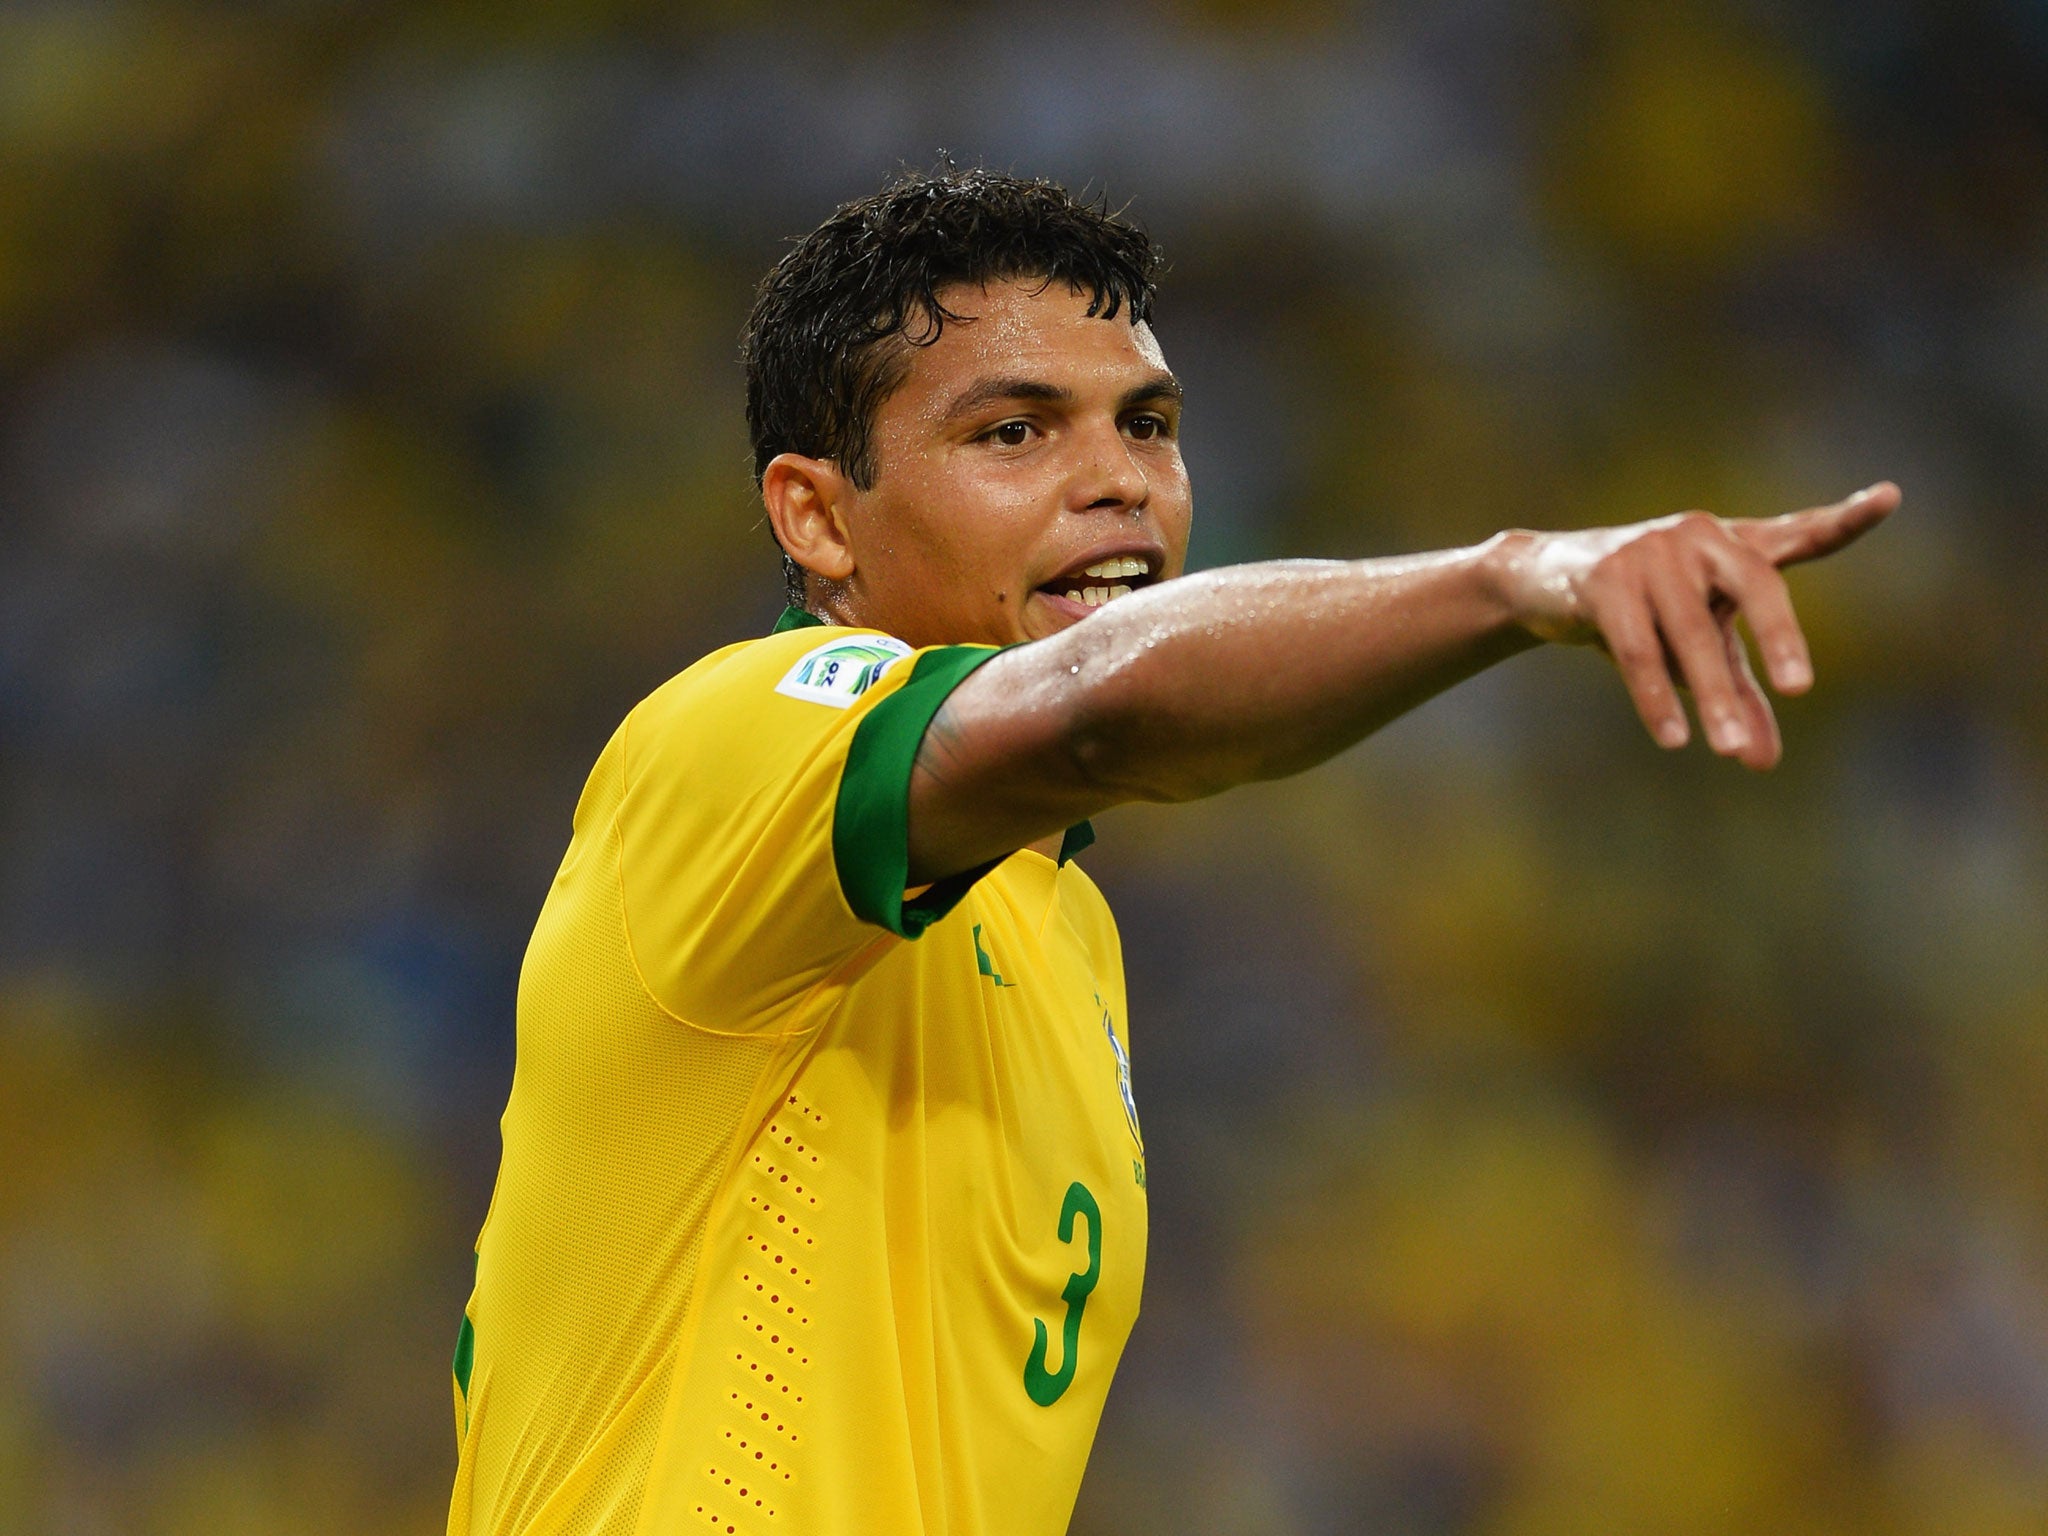 Thiago Silva – Brazil The second Brazilian to appear, Thiago Silva has emerged as one of the leading central defenders in world football. Silva currently leads French league champions Paris St-Germain as well as his country, and the entire nat